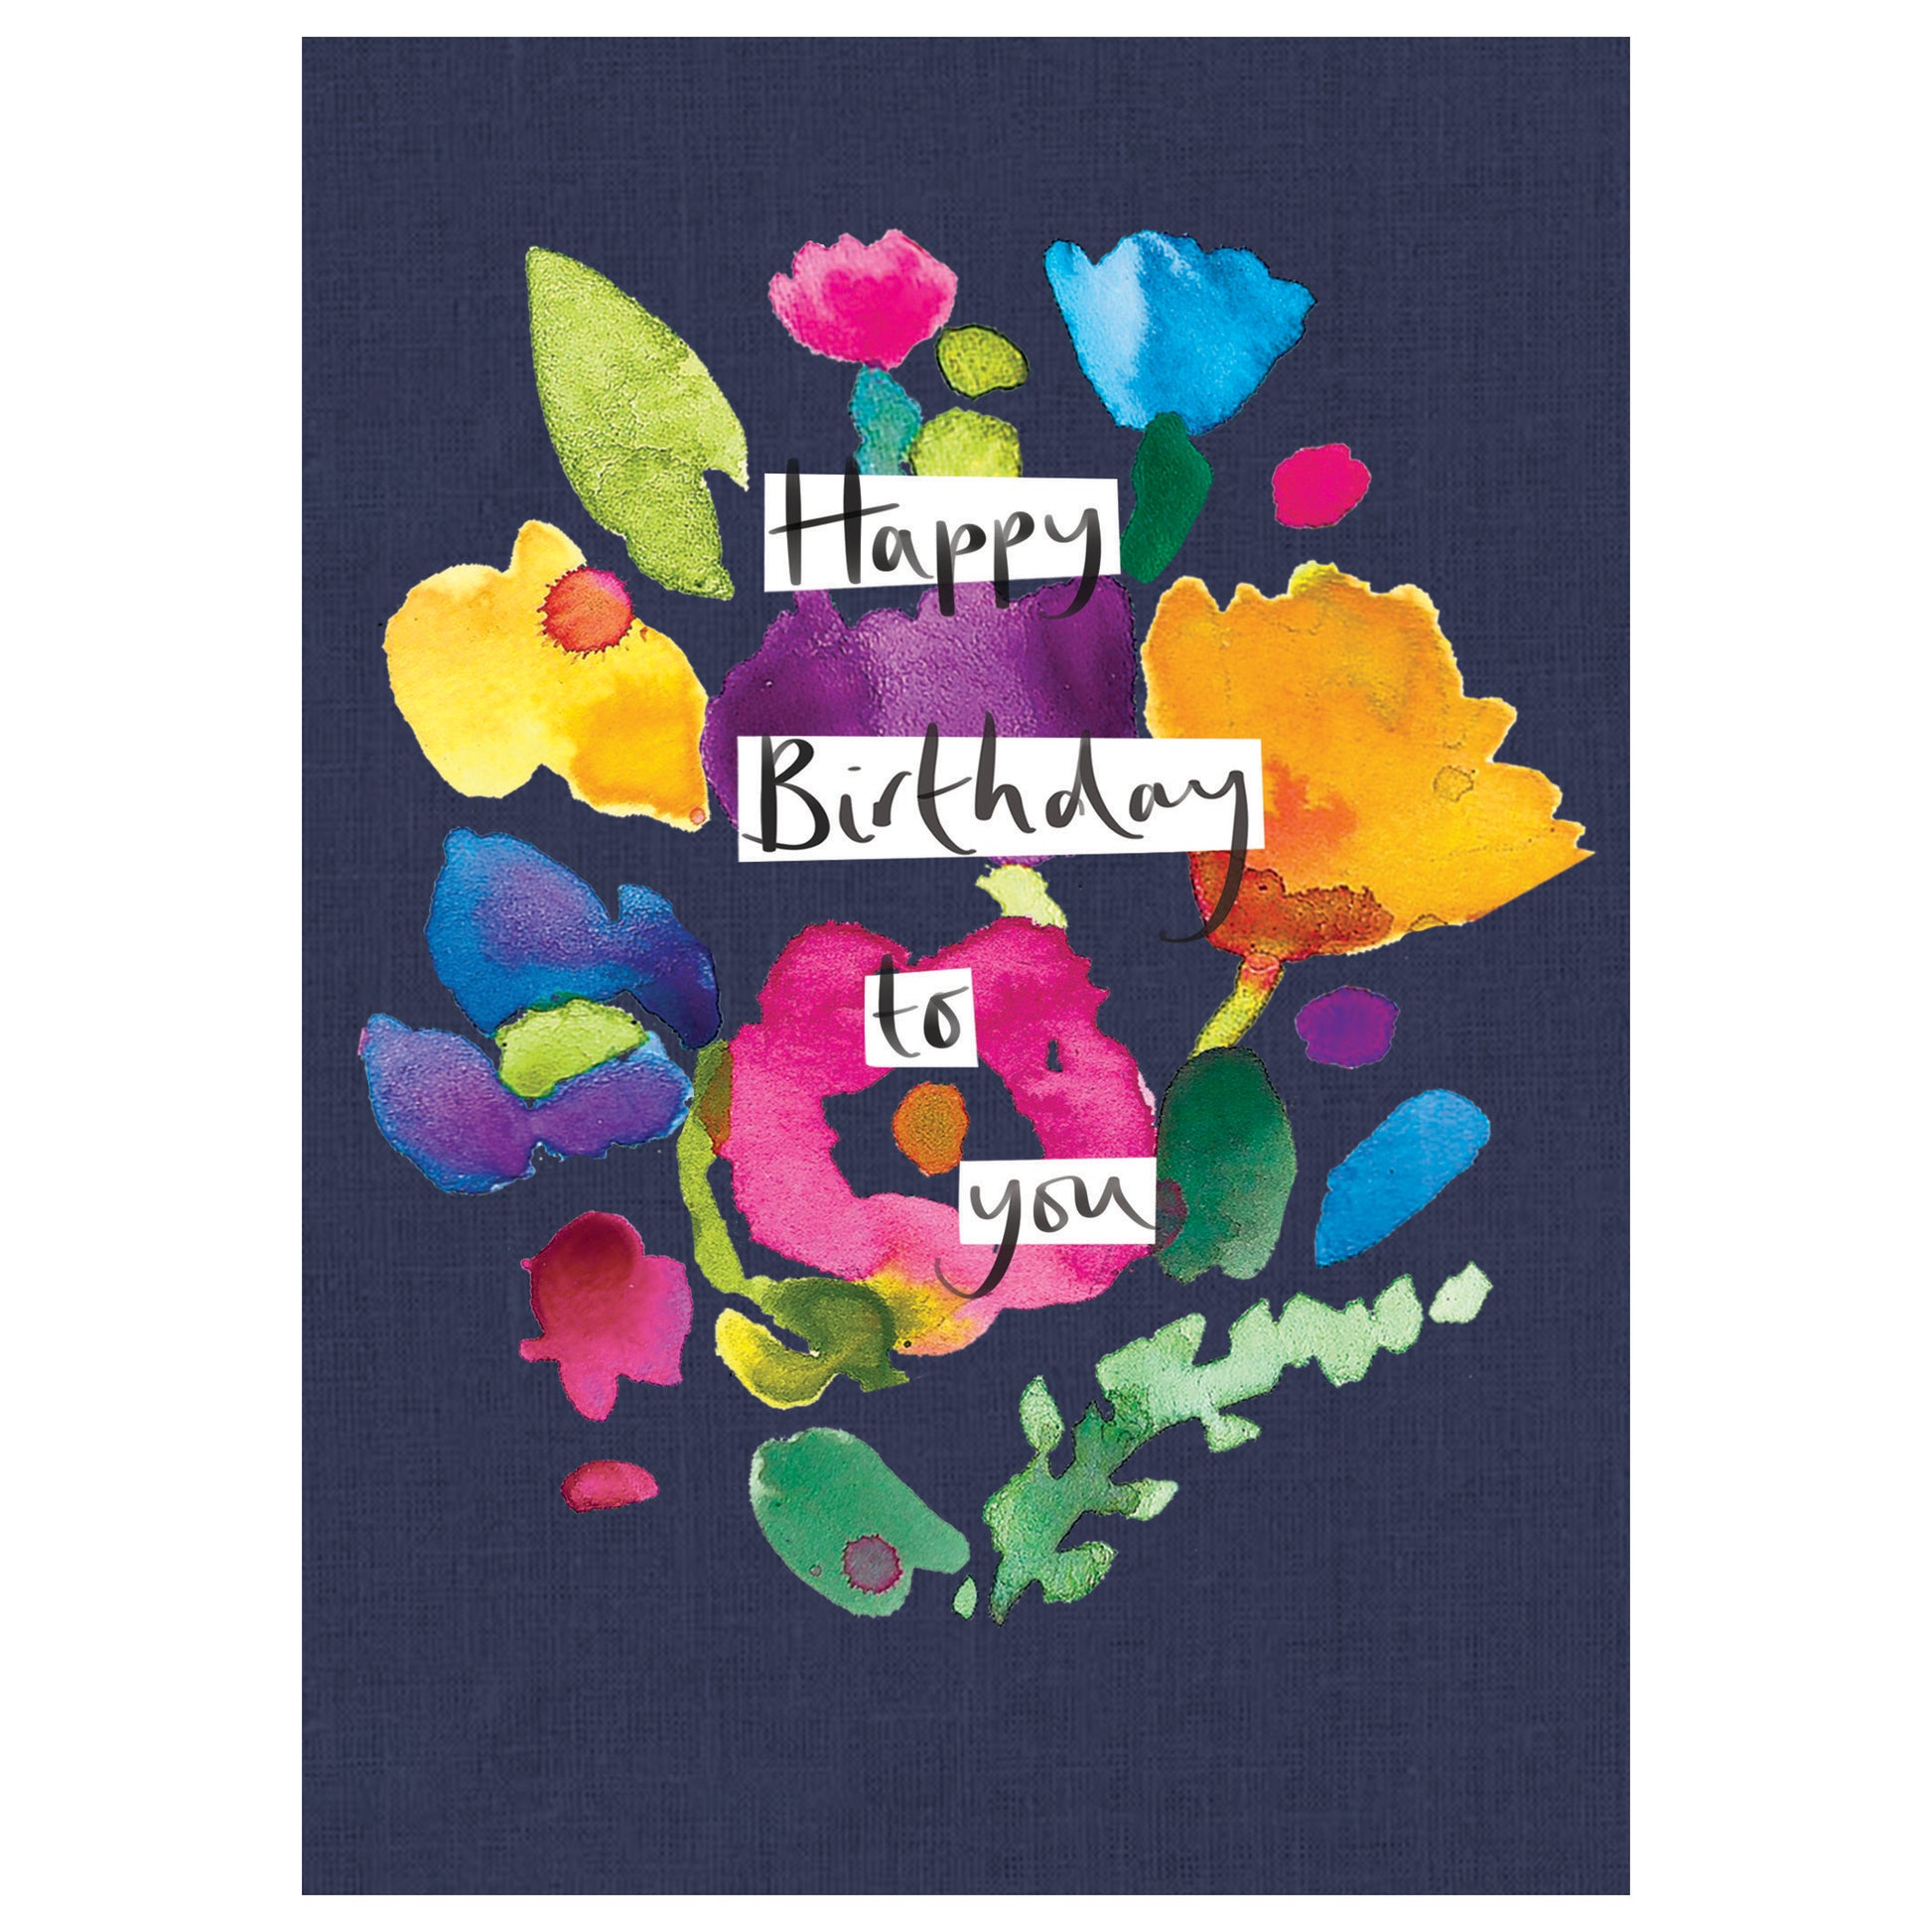 Happy Birthday Ink Floral Collage Greeting Card